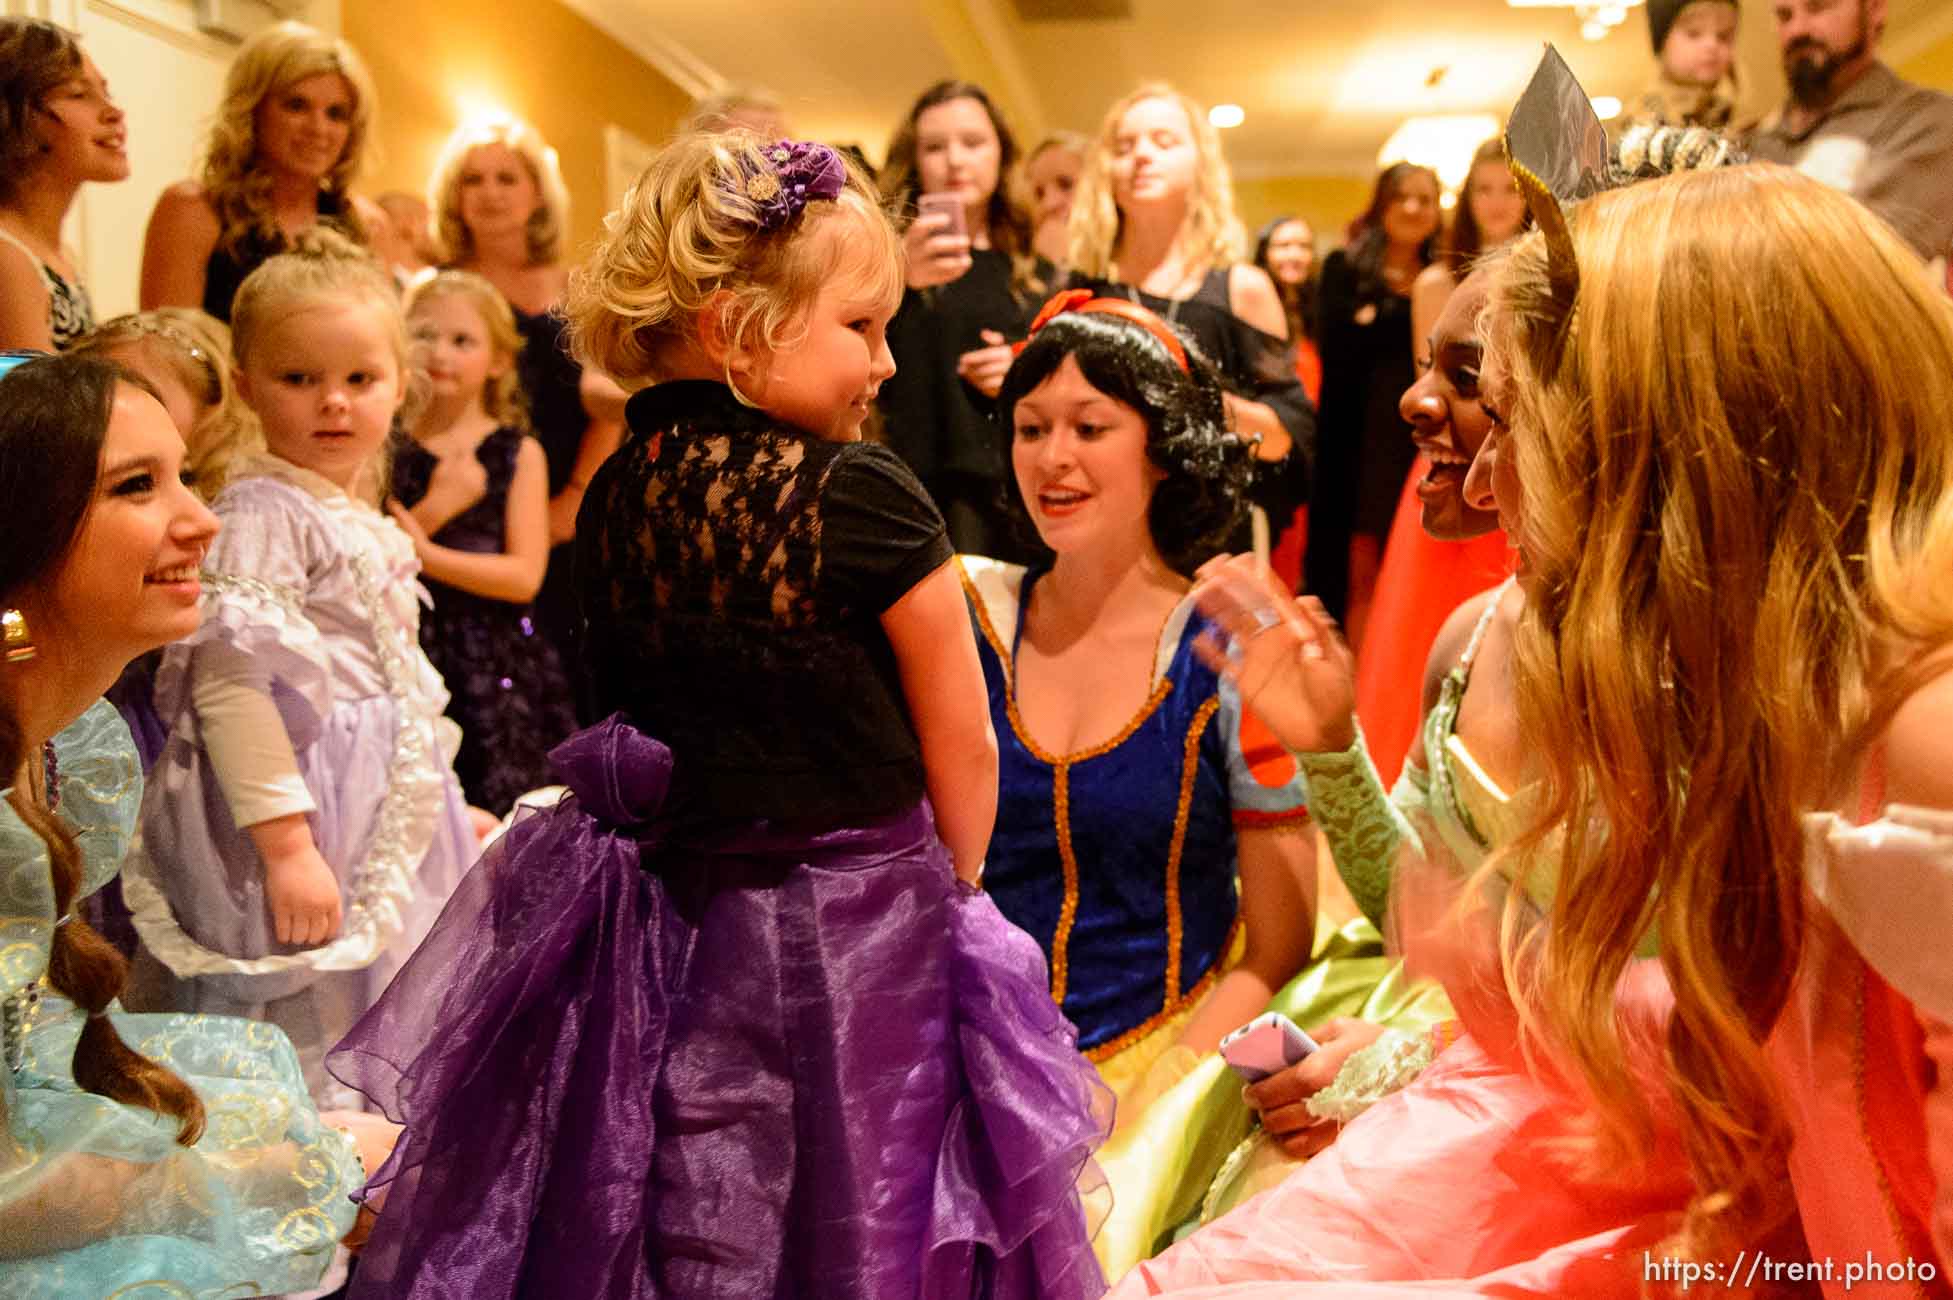 Trent Nelson  |  The Salt Lake Tribune
Raenalynn Brock, a 4-year-old diagnosed with cancer, meets a group of princesses at her prom. Brock had always wanted to go to prom, so one was put on for her at the Hotel Monaco in Salt Lake City, Saturday November 15, 2014.